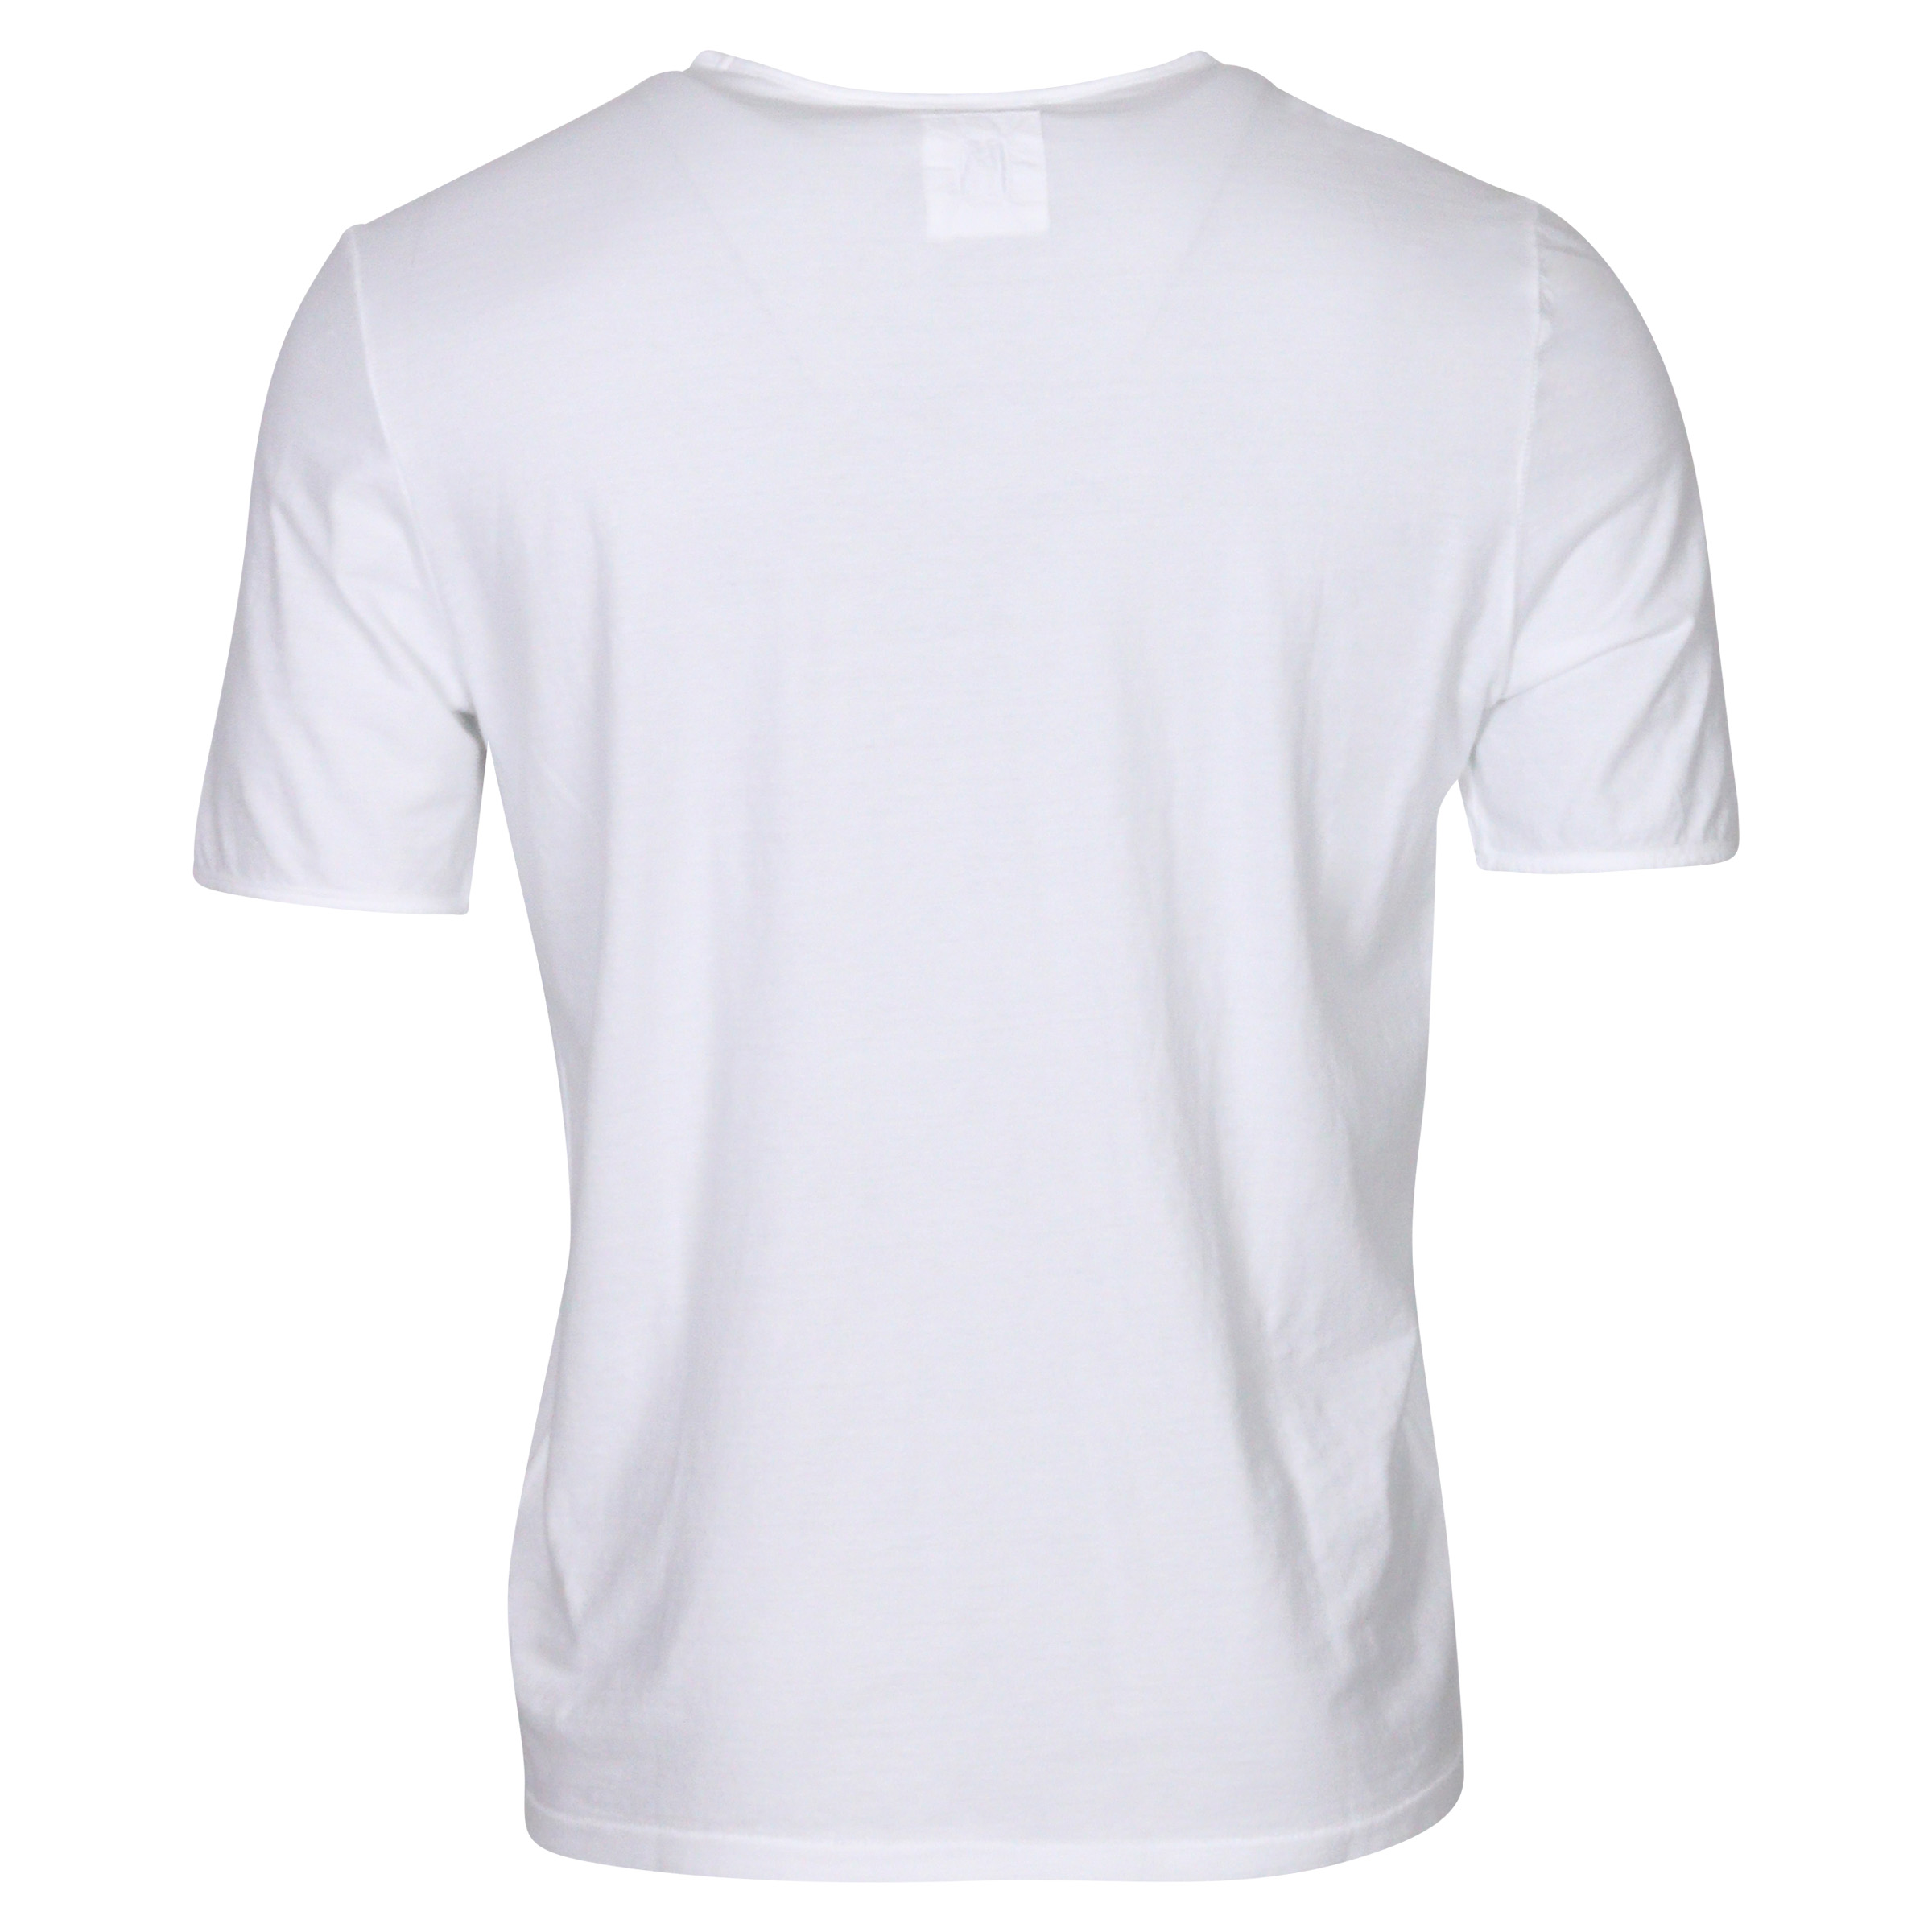 Hannes Roether T-Shirt White M